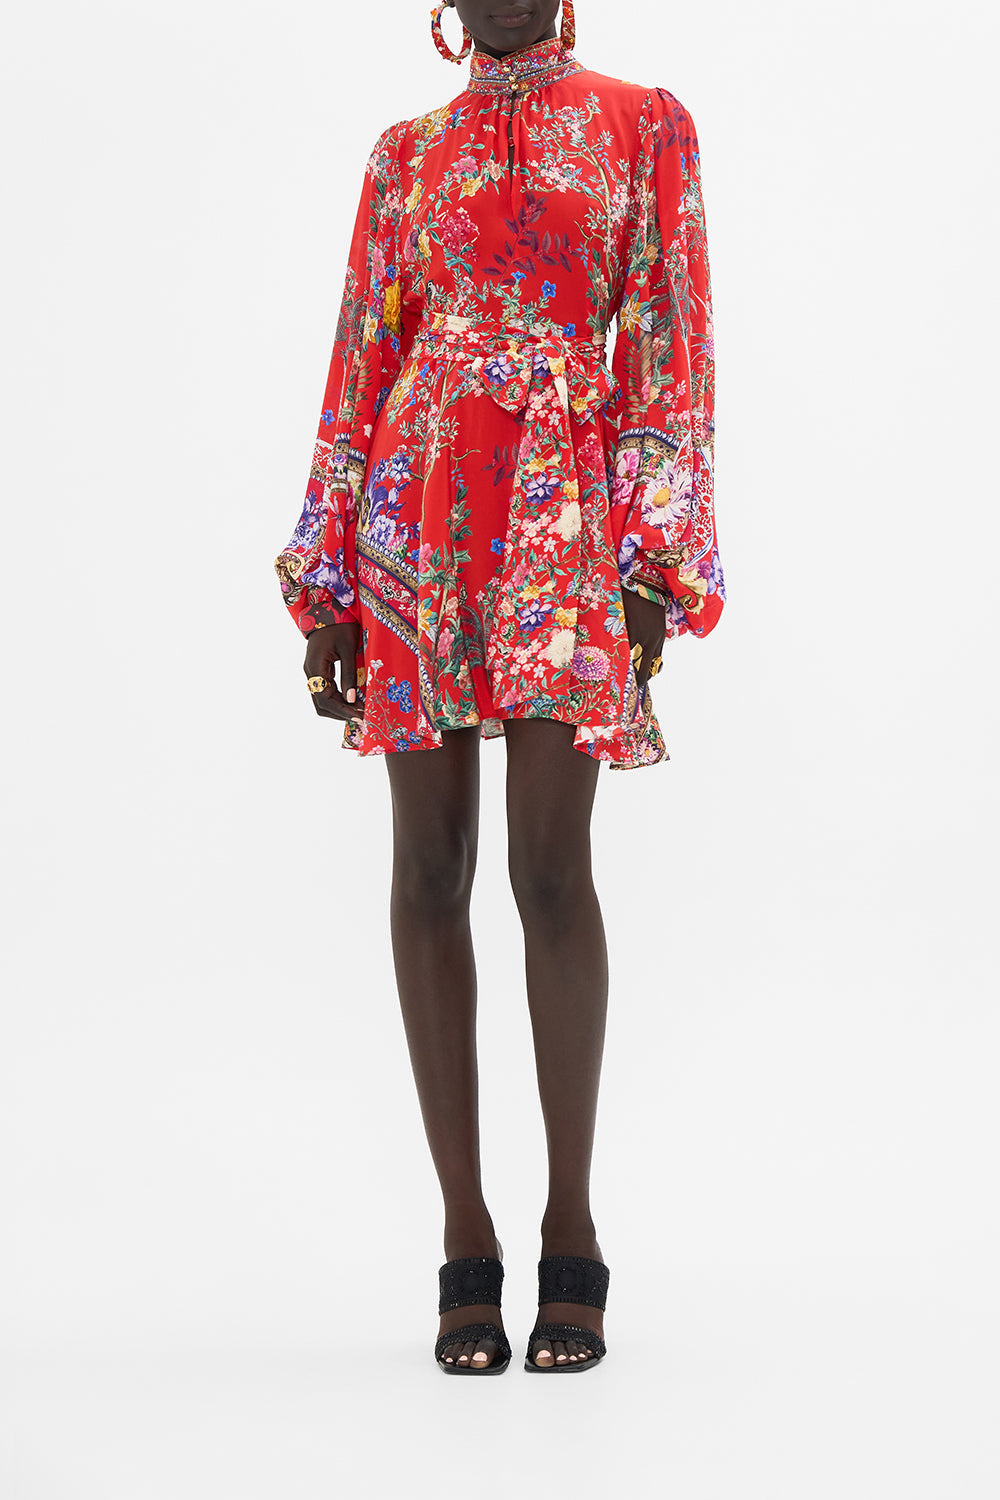 CAMILLA floral print mini dress in The Summer Palace print